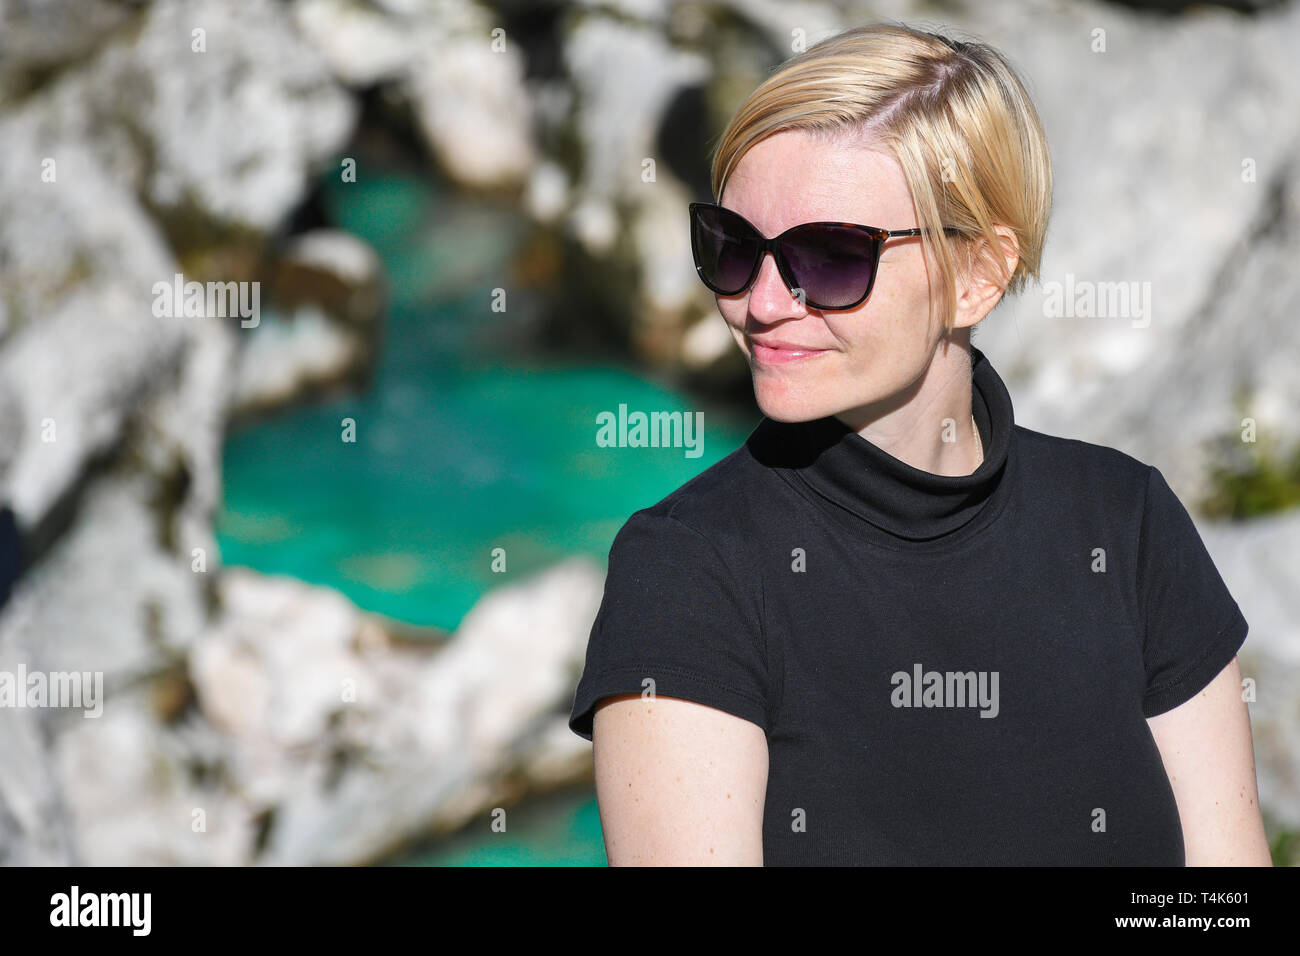 Happy smiling woman with black sunglasses and shirt posing next to a beautiful turquoise colored Soca river canyon in the background, Slovenia Stock Photo